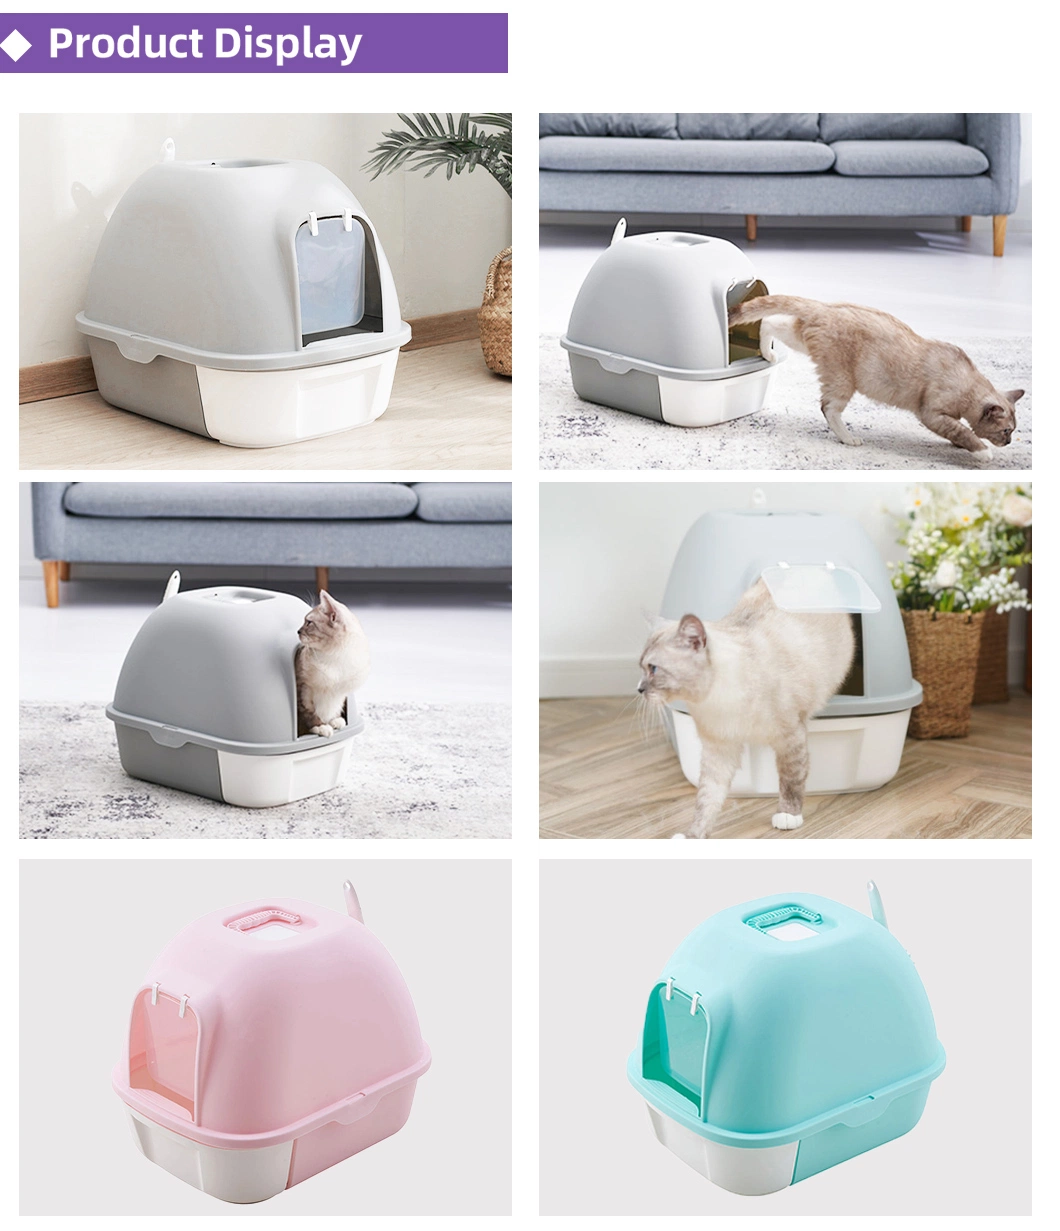 Portable Pet Products Cleaning Closed Splash-Proof Easy to Clean Large Space Plastic Cat Toilet Trays Durable Eco Friendly Cat Litter Box